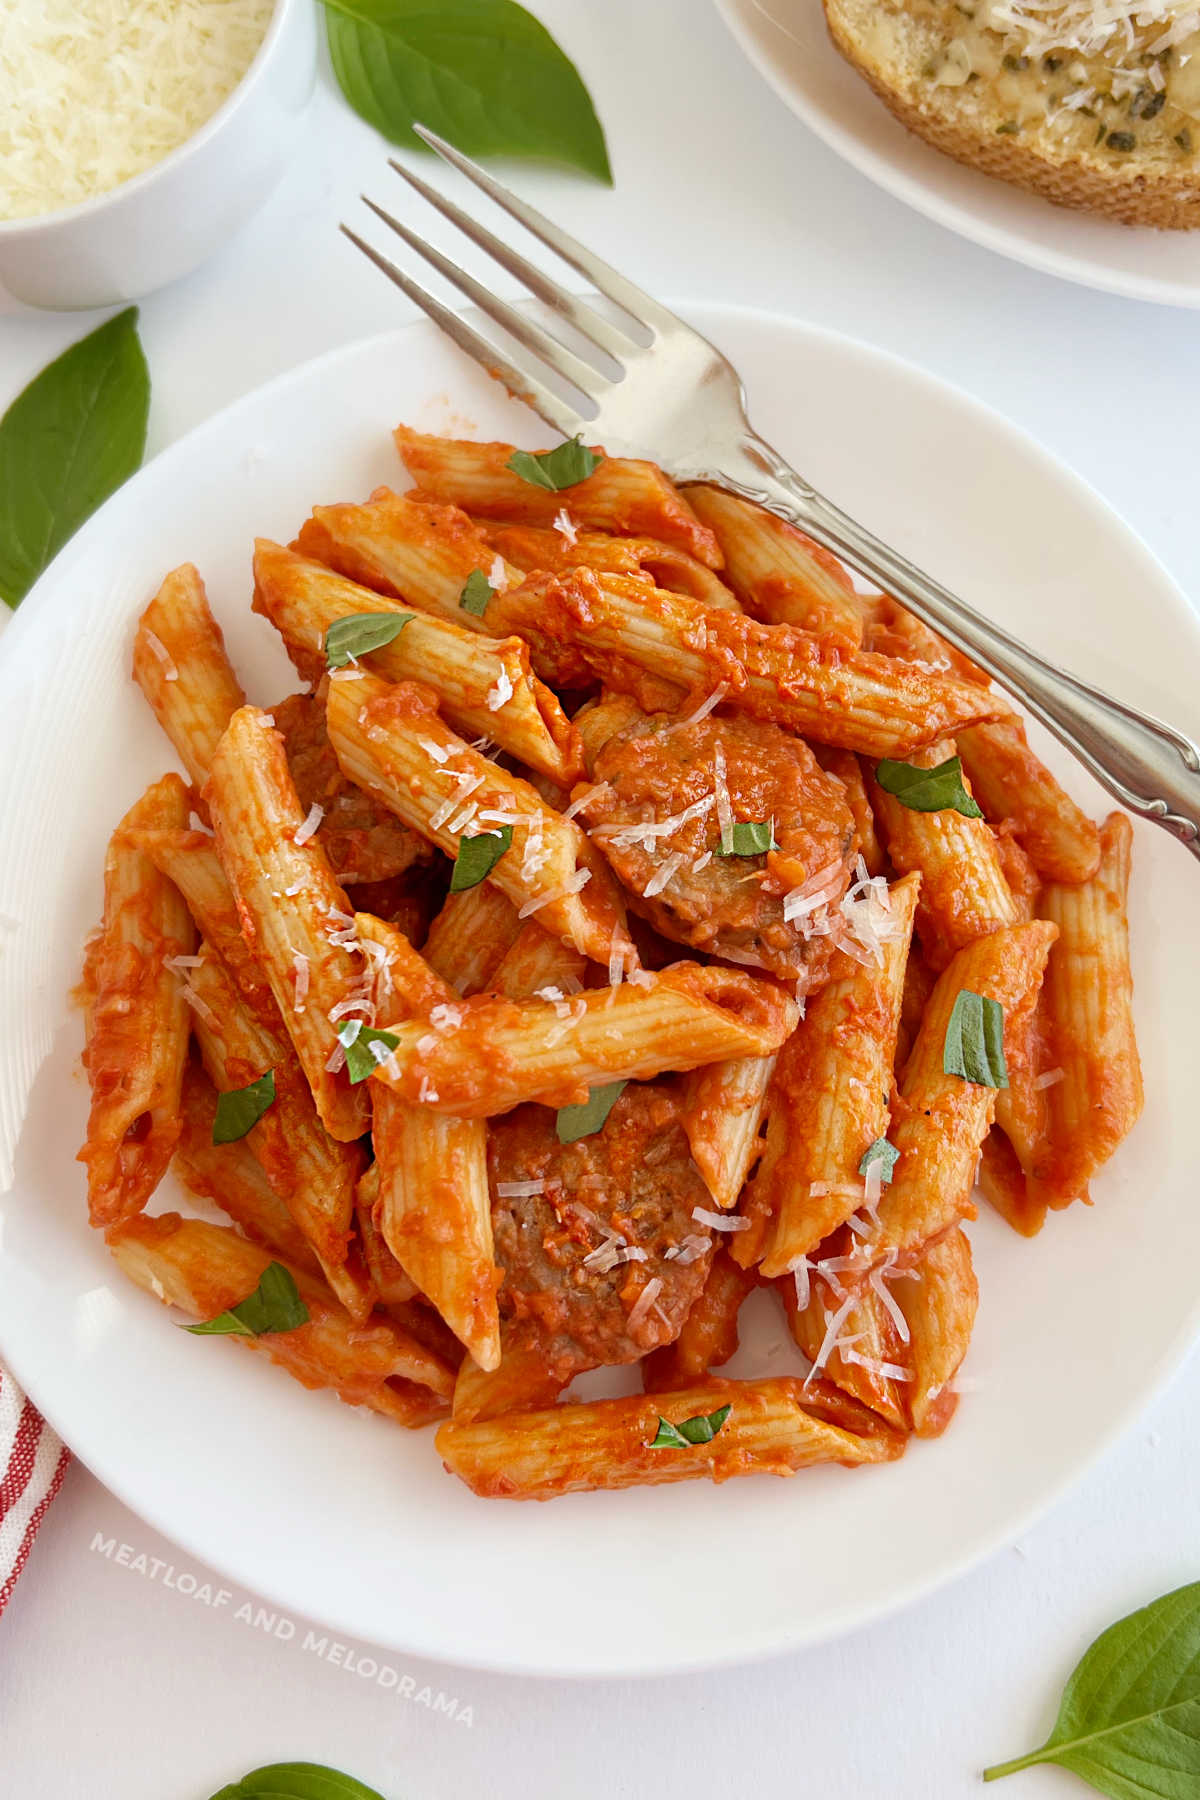 penne alla vodka with Italian sausage, Parmesan cheese and fresh basil